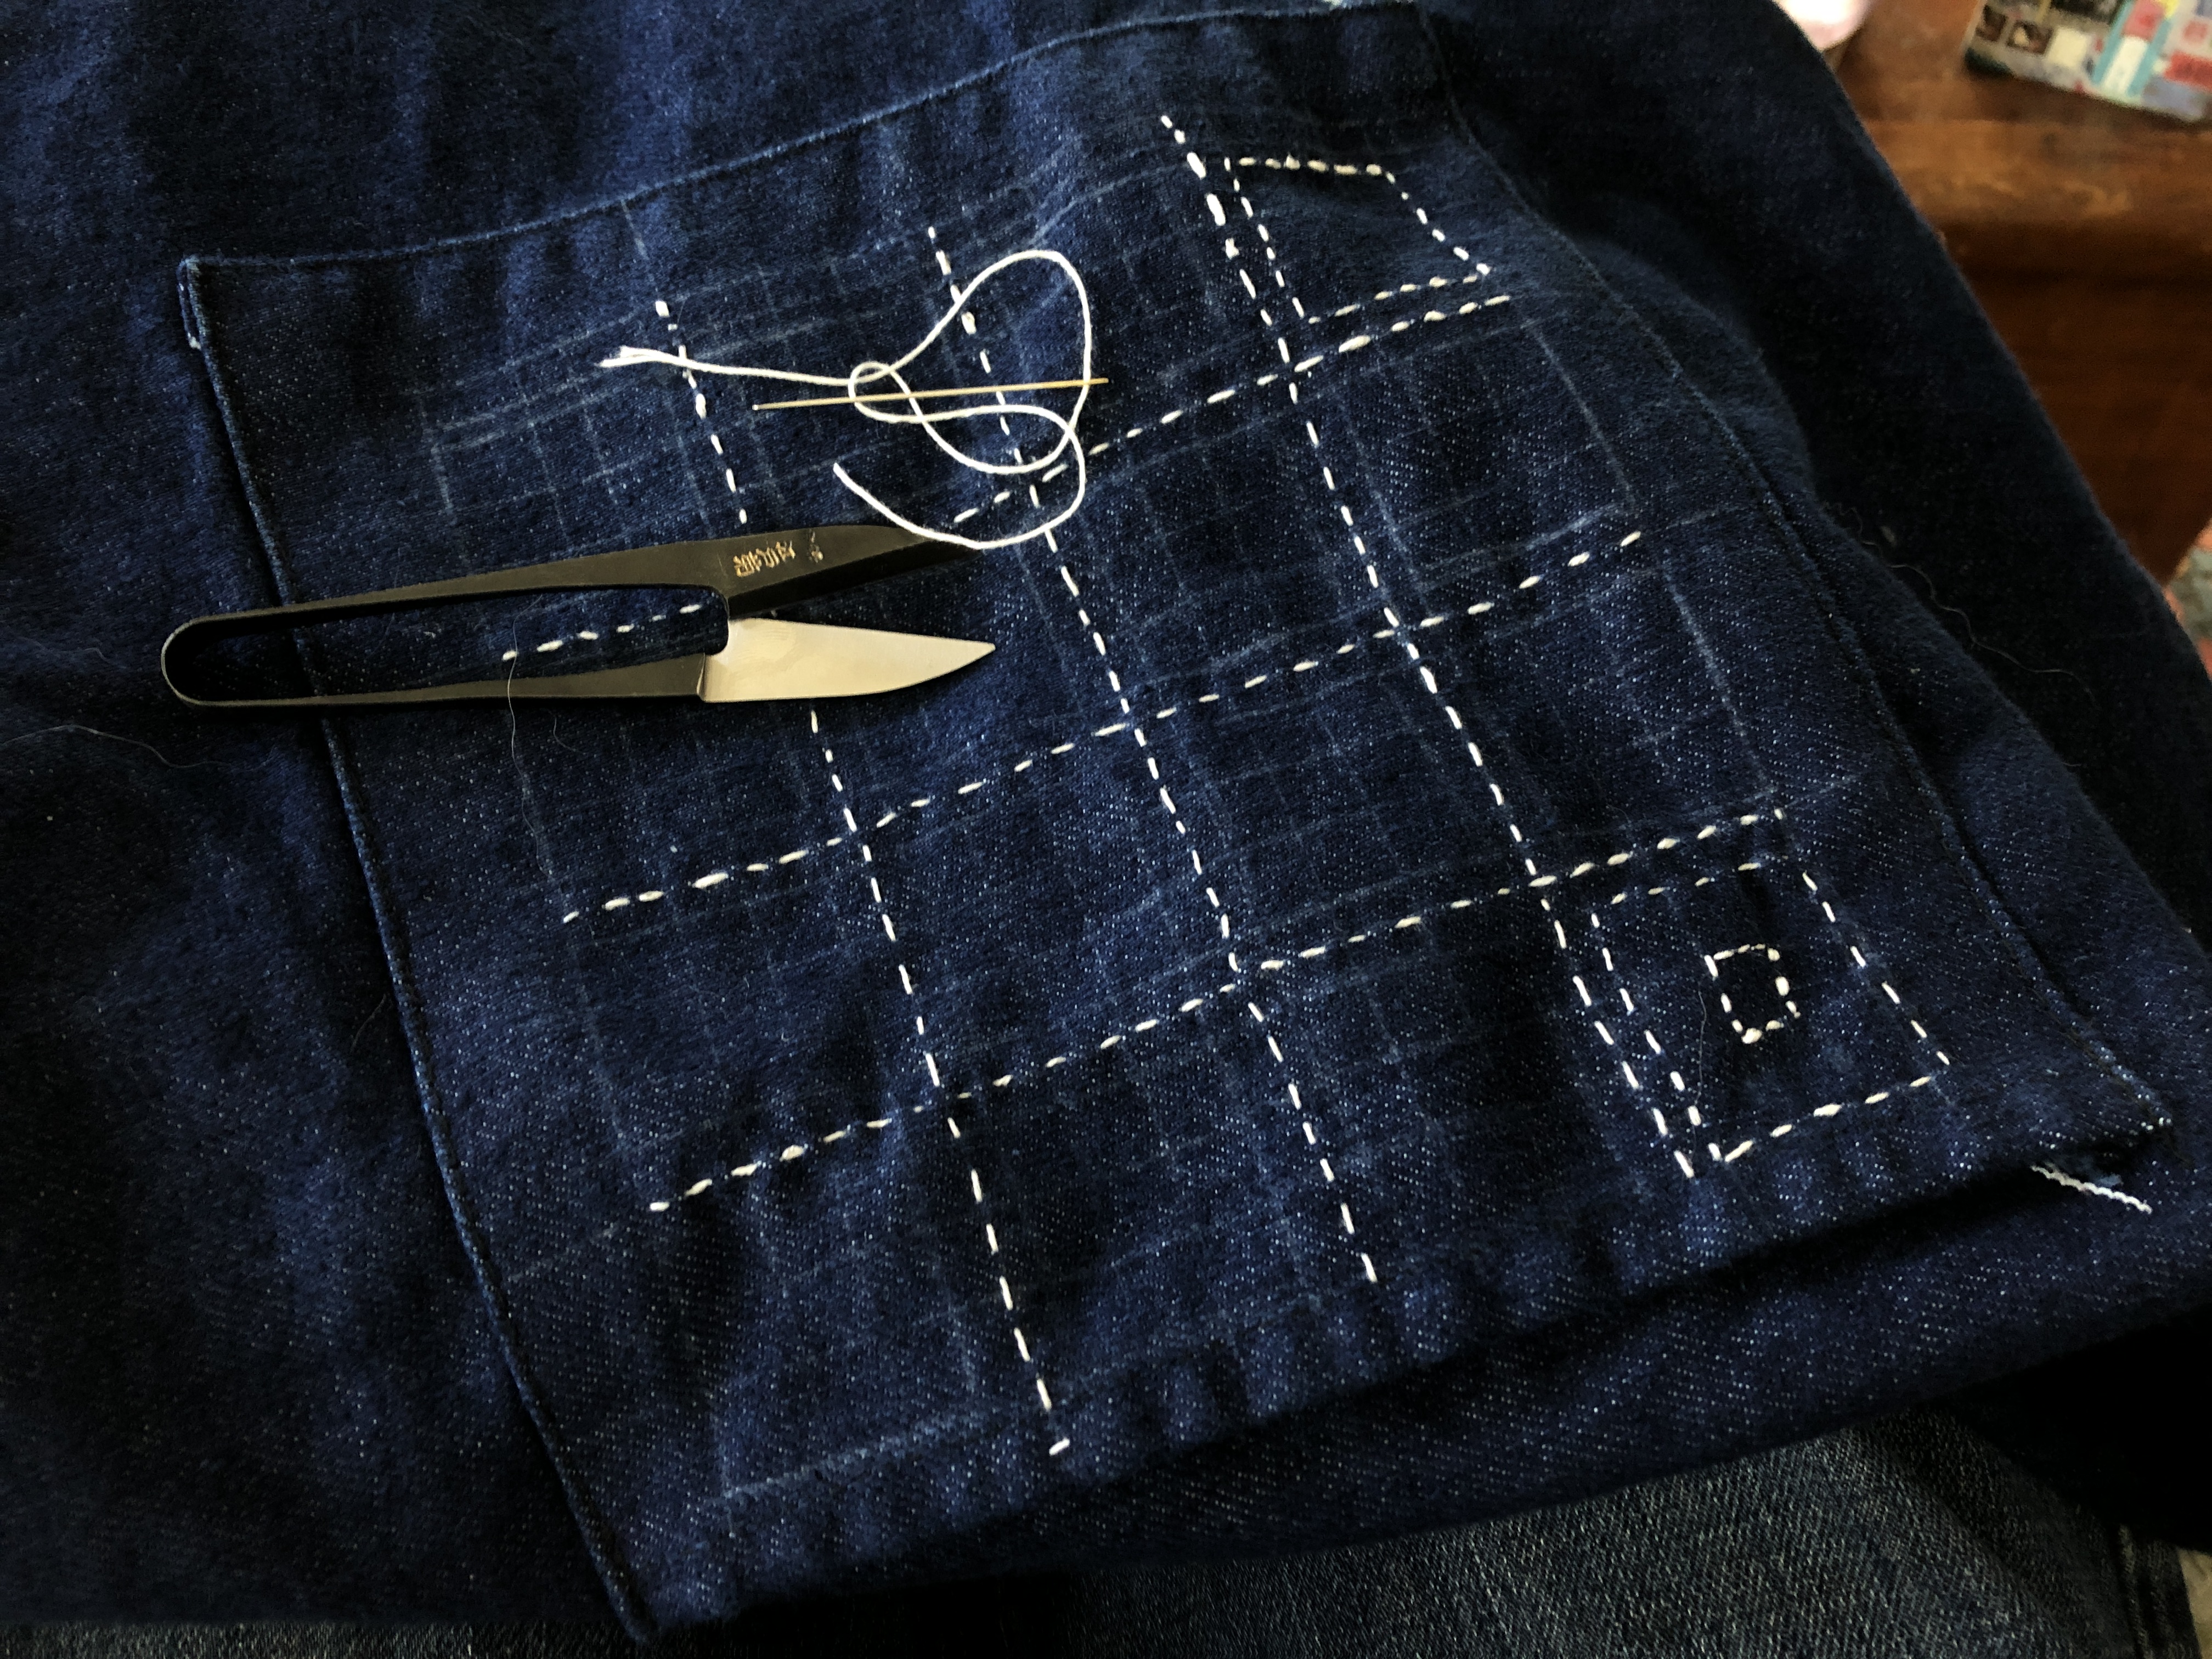 embroidered blue fabric pocket with needle, snips, and thread